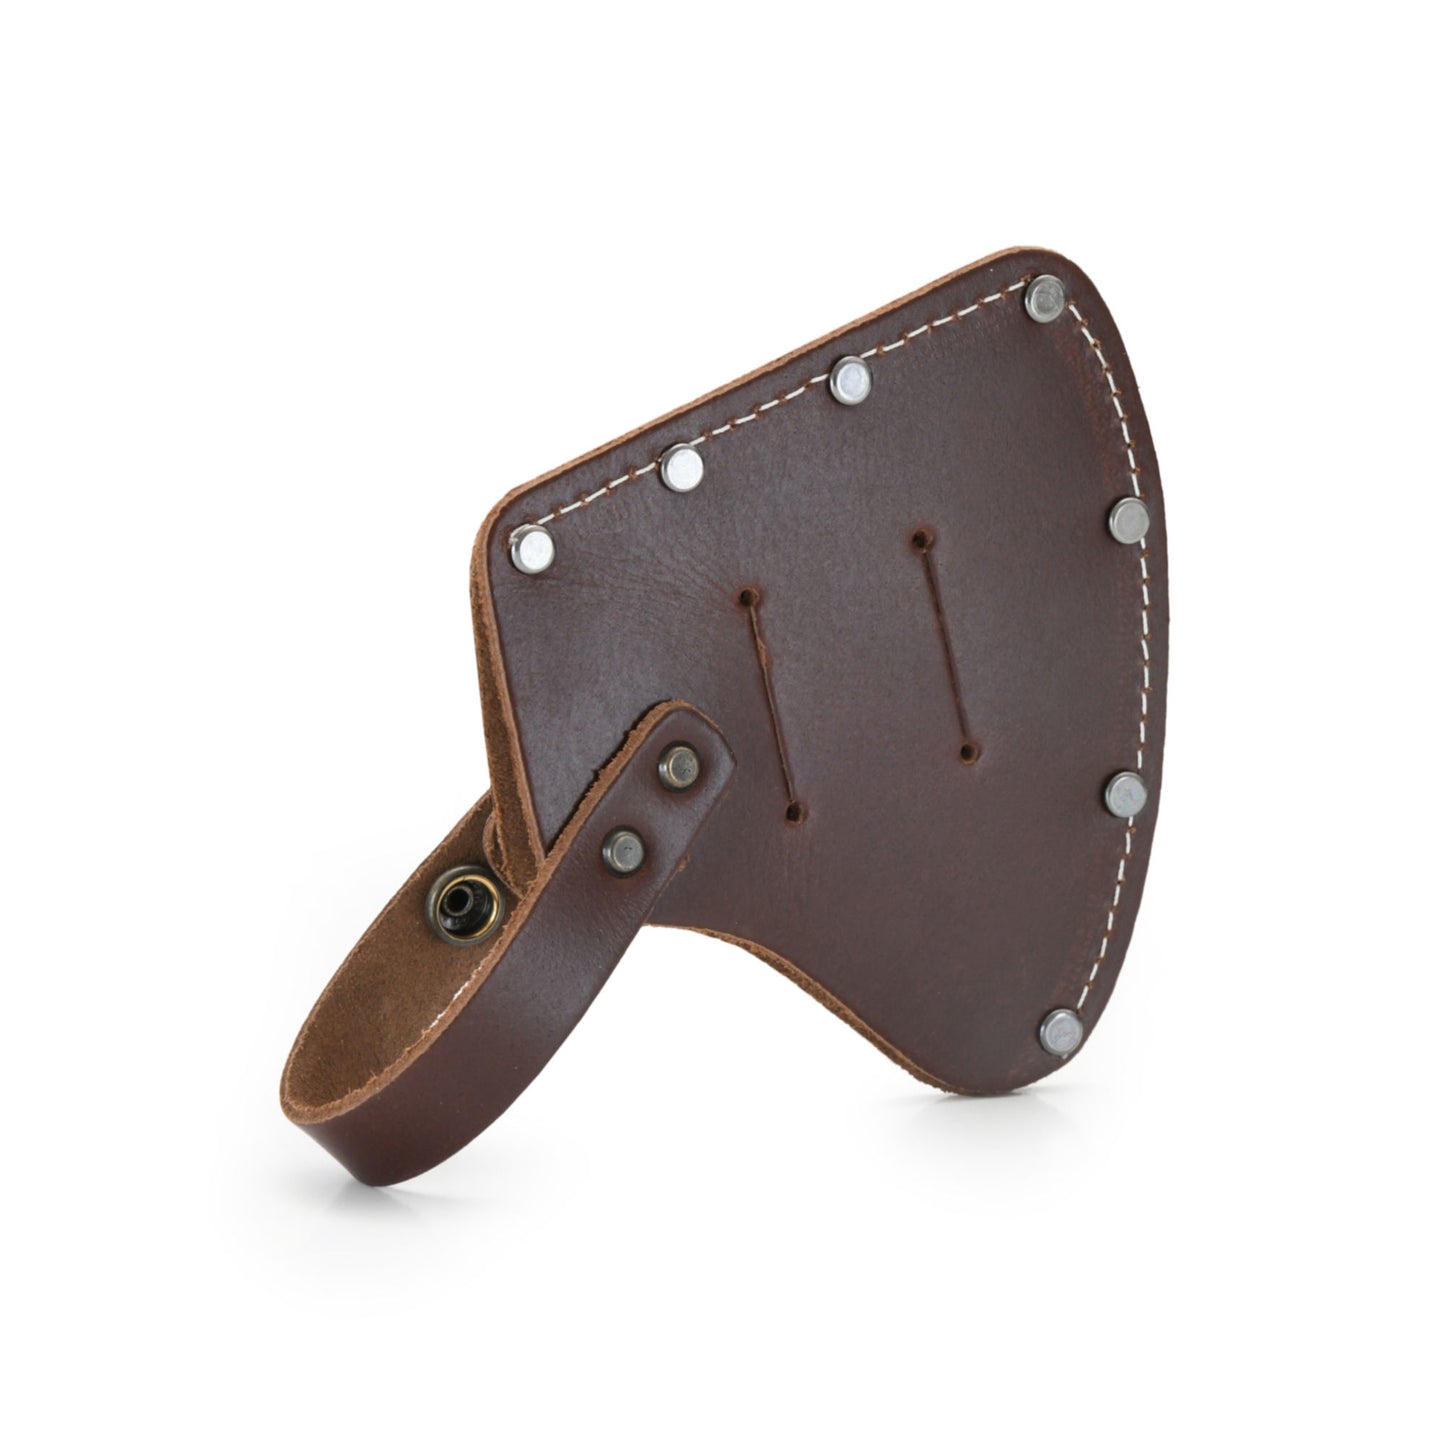 Style n Craft 98025 - Camper's Hatchet Sheath / Axe Cover in Heavy Top Grain Leather in Dark Tan Color. It has a Double Snap Button Closure - Back View